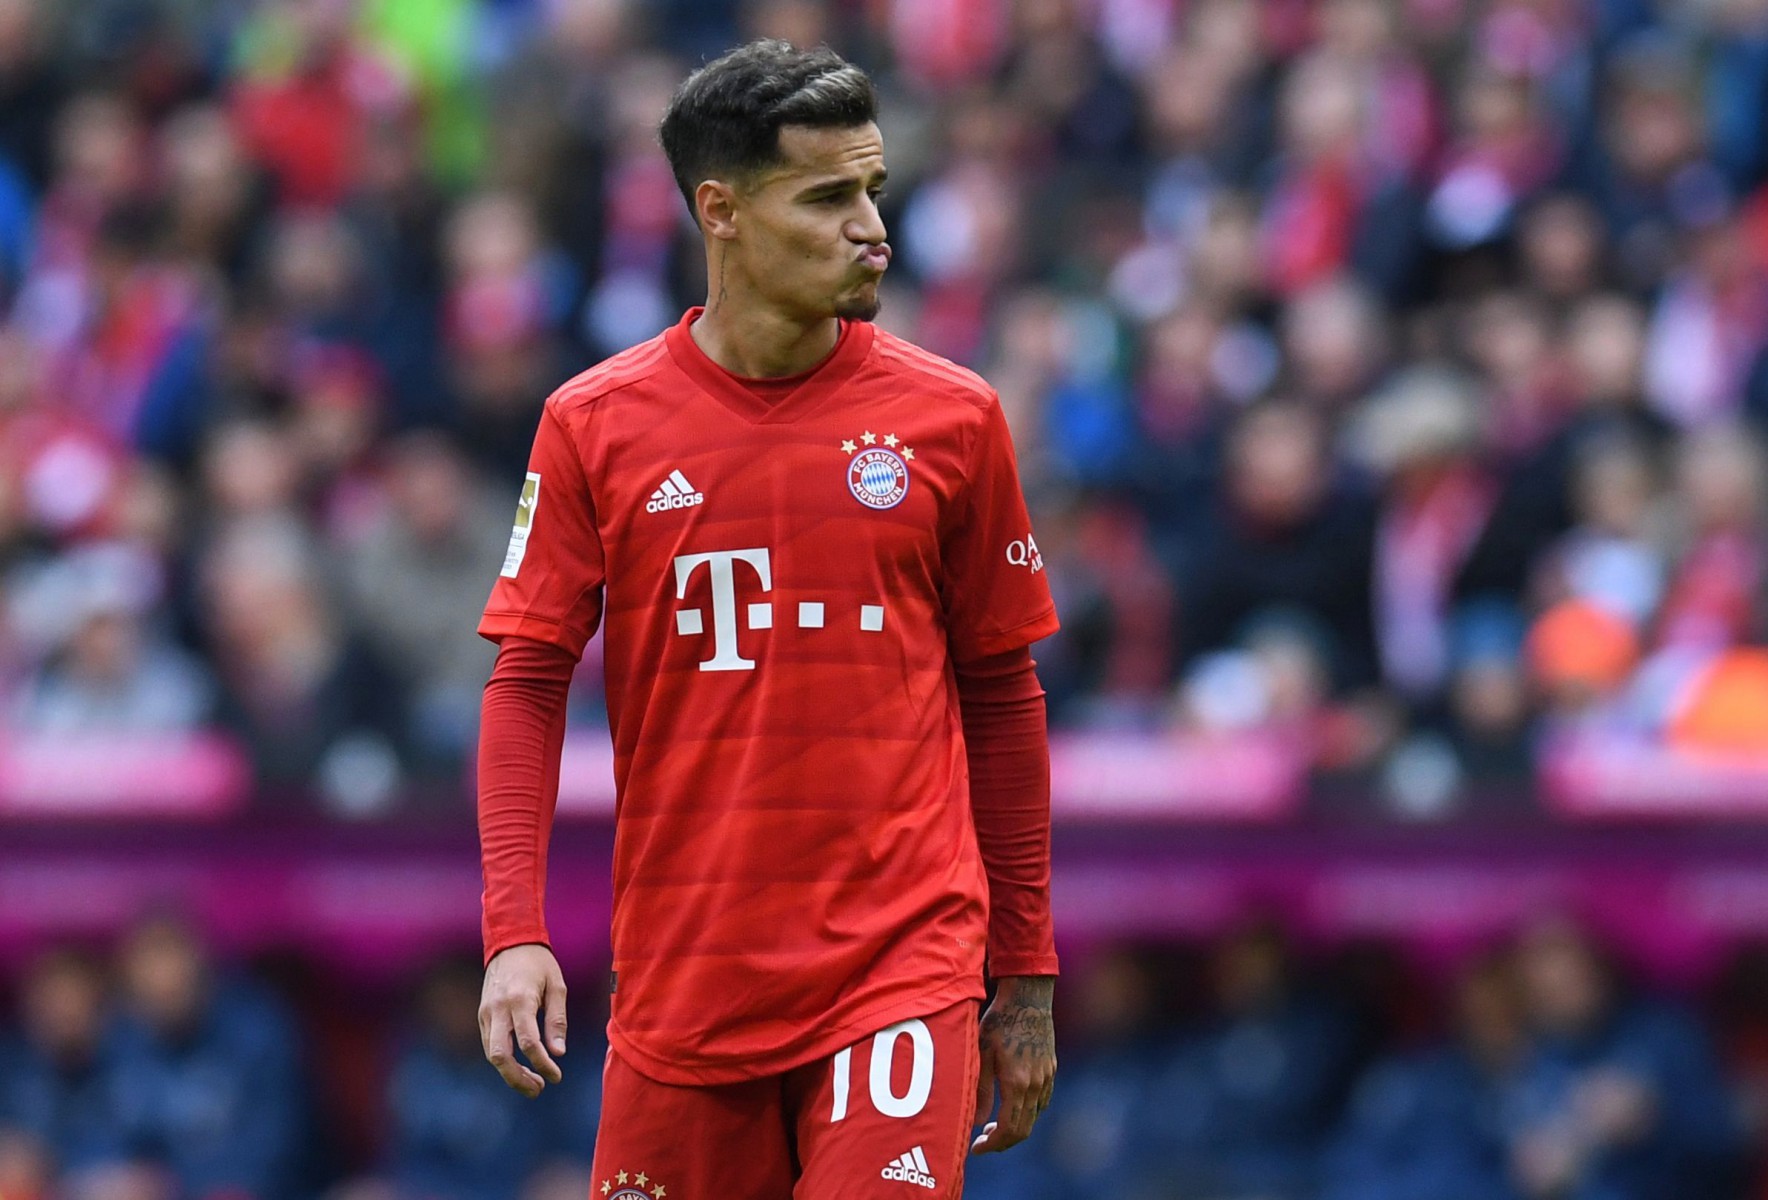 , Bayern set for exodus with FIVE stars including Coutinhos futures in doubt.. but Man Utd and Arsenal can benefit